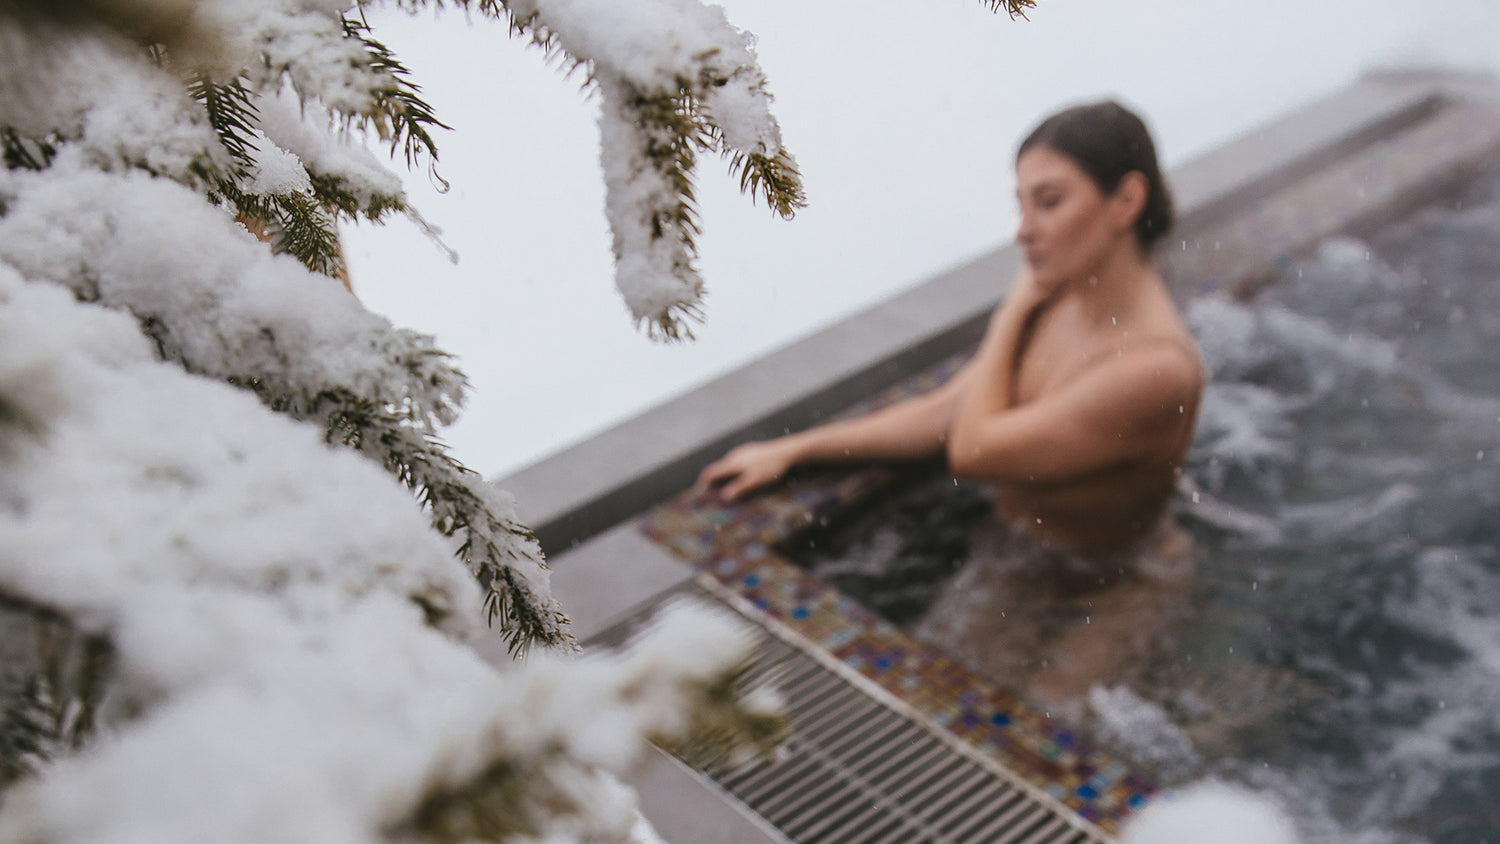 woman in hot tub in the winter. She is holding her shoulder. Snowy pine tree in foreground on left hand side.